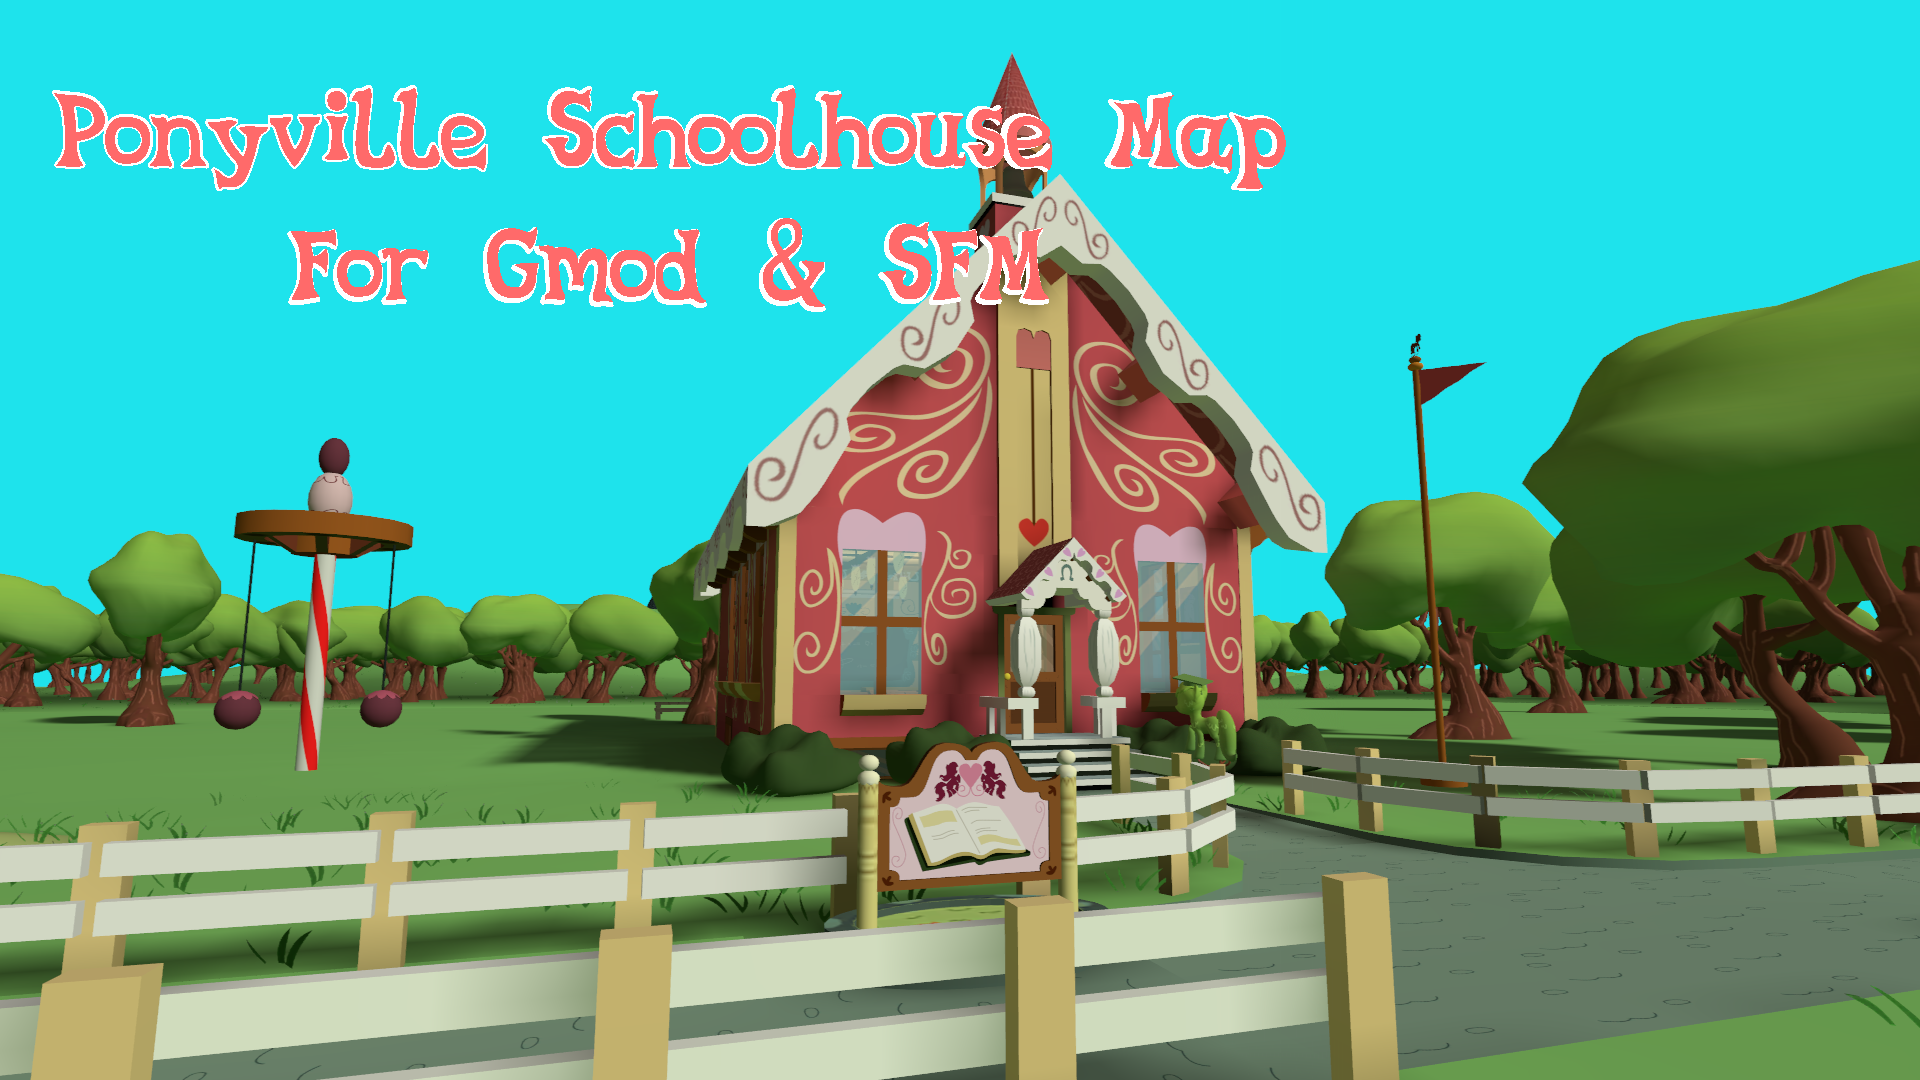 Ponyville Schoolhouse DOWNLOAD! (GMOD AND SFM)